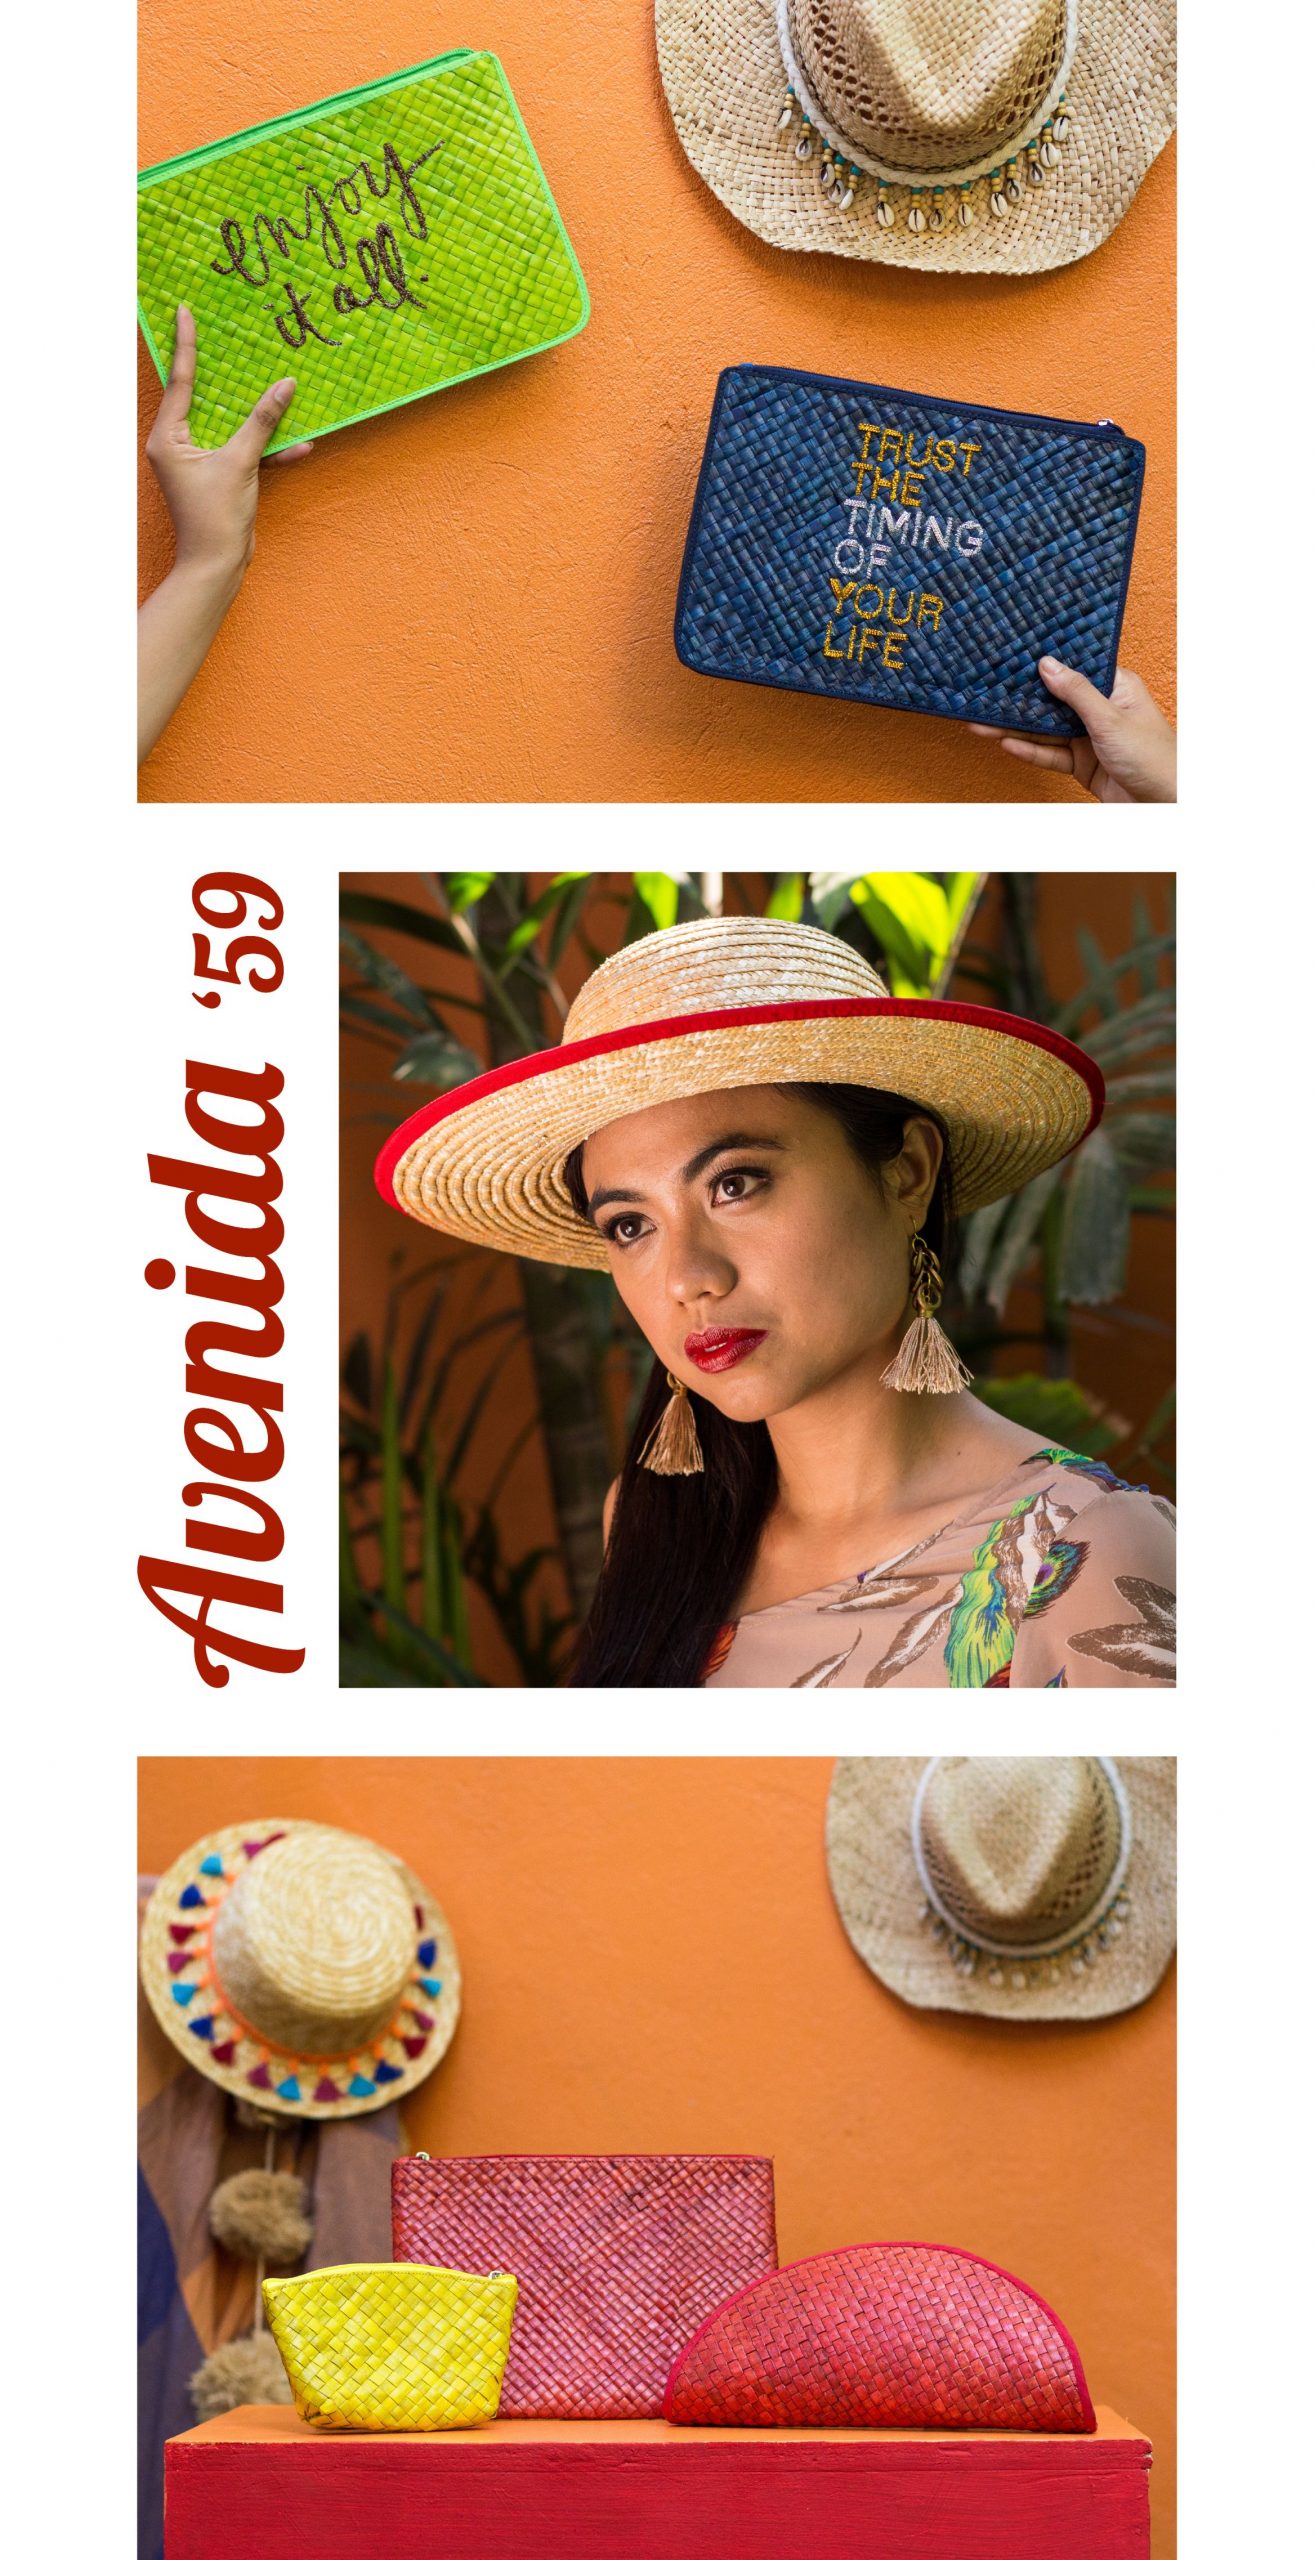 an image of handbags and a woman in a hat with earrings